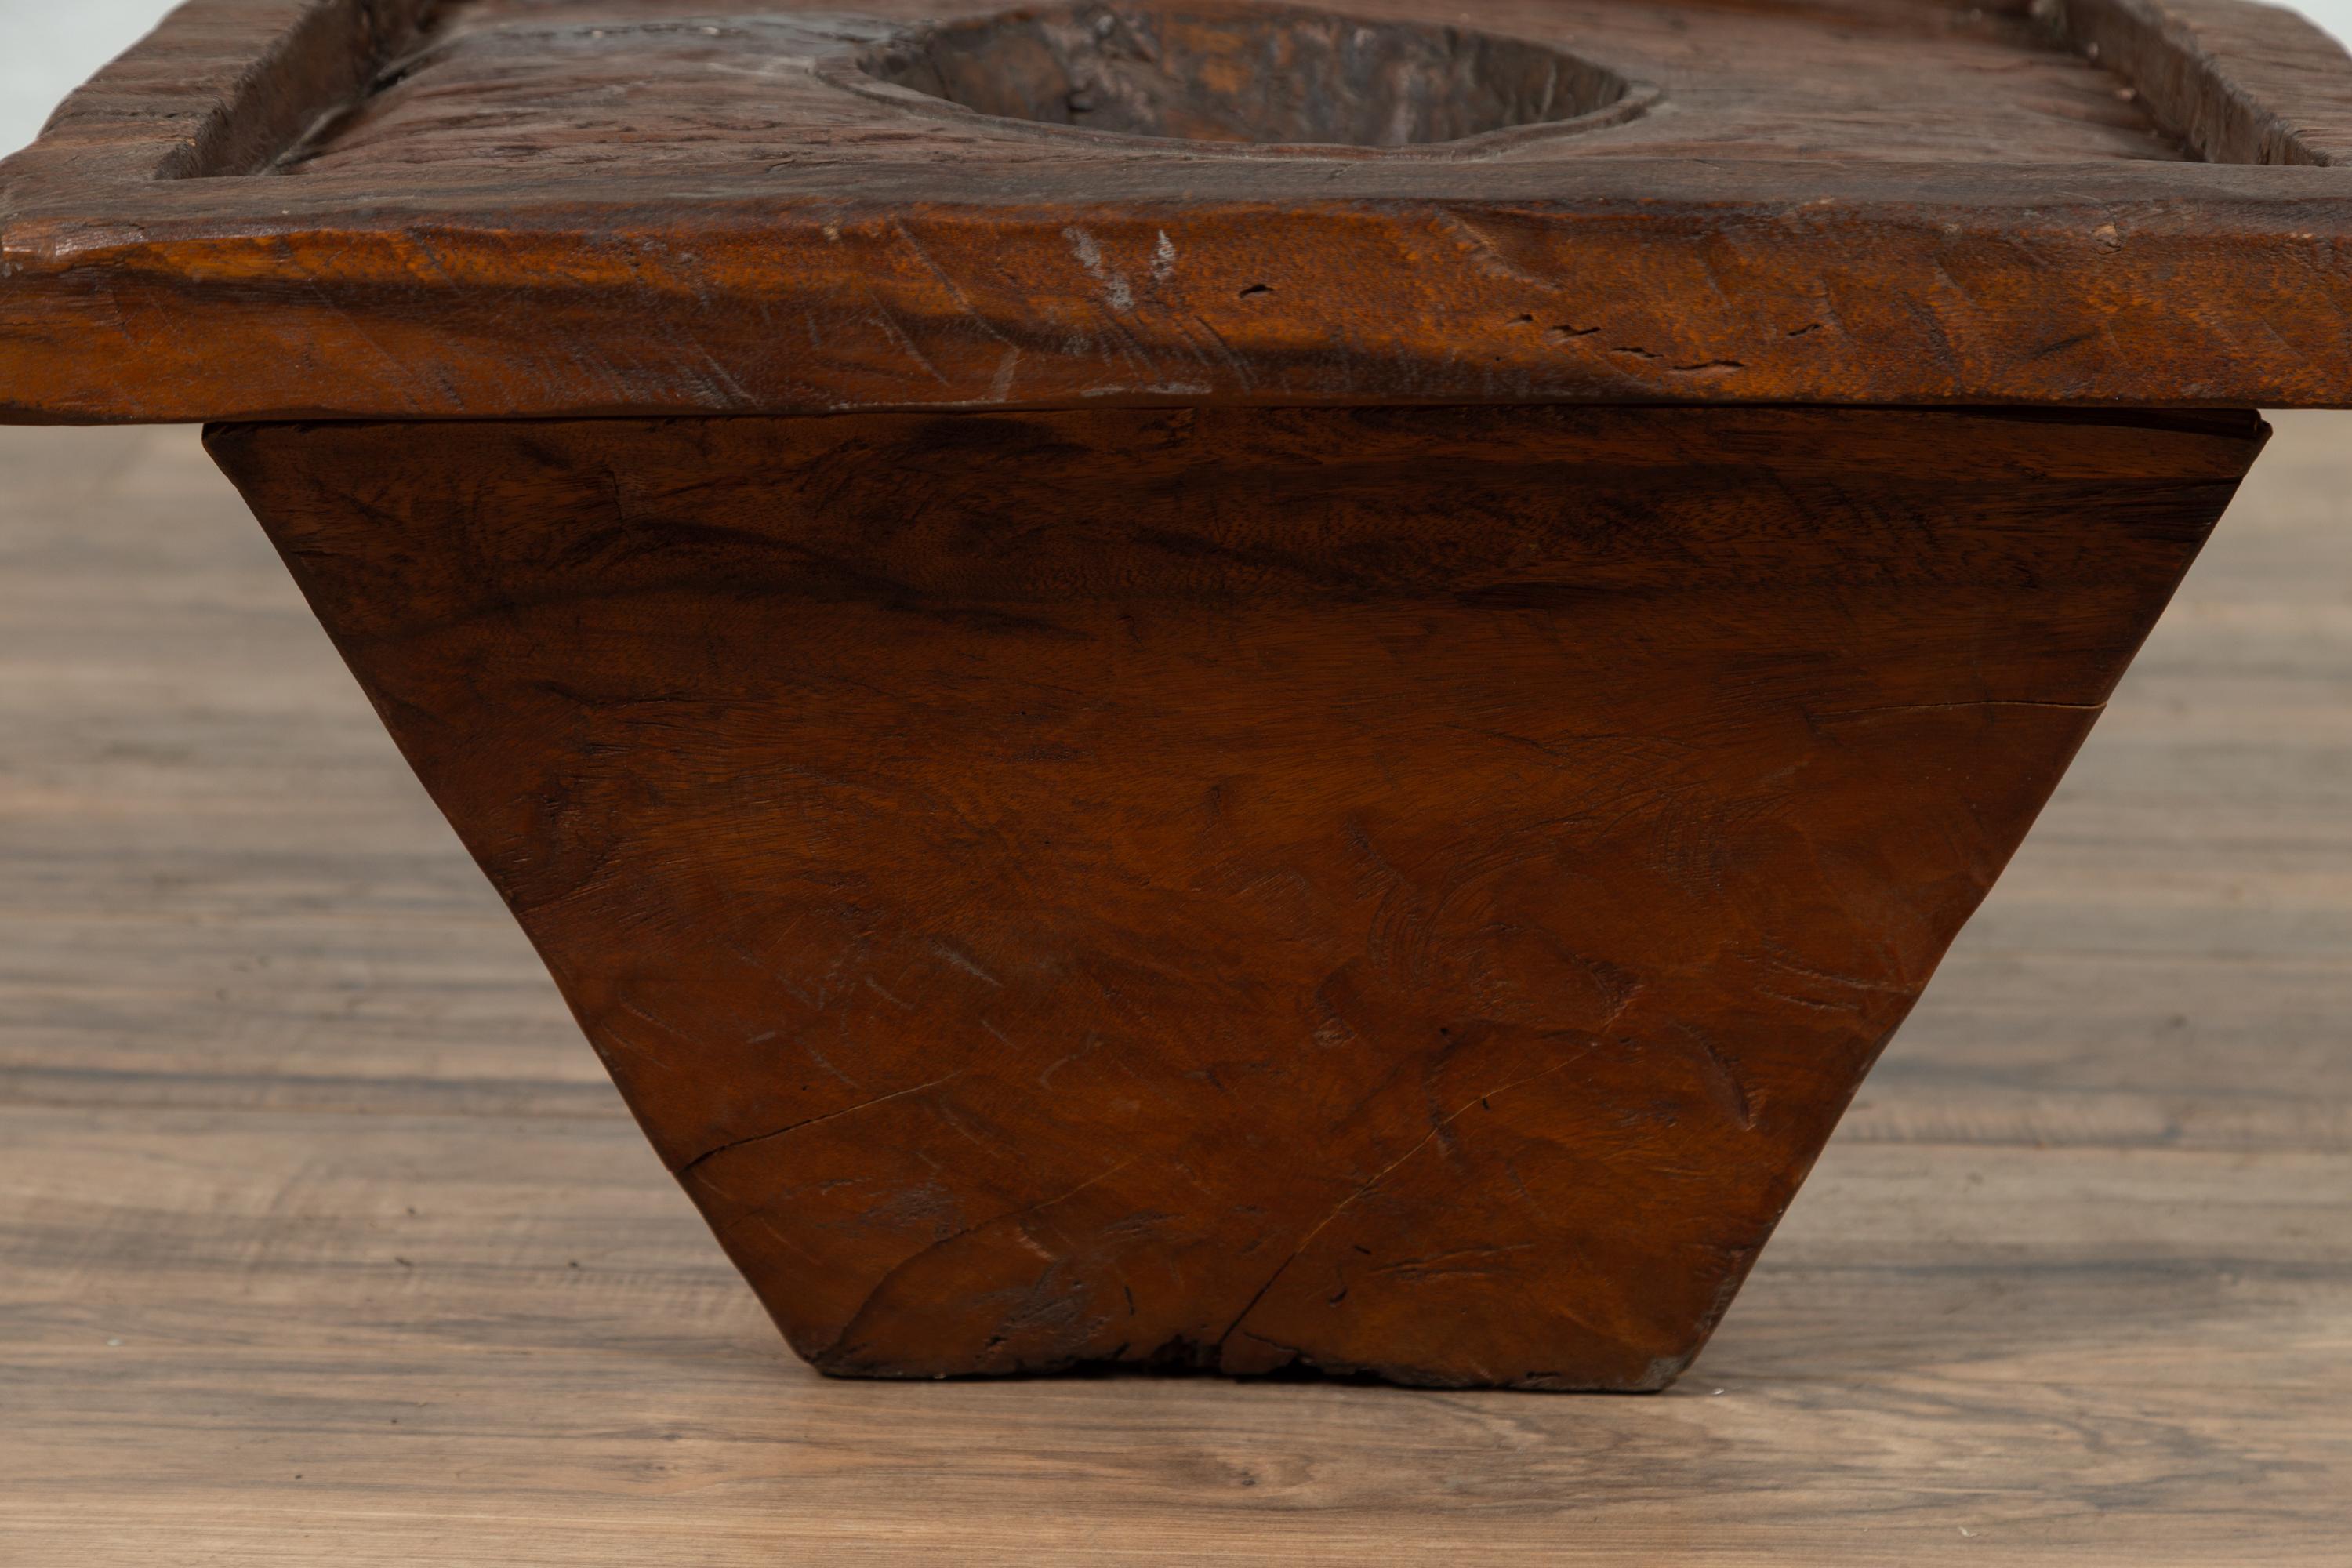 Wooden Indonesian Brown Mortar Planter from the Early 20th Century For Sale 2